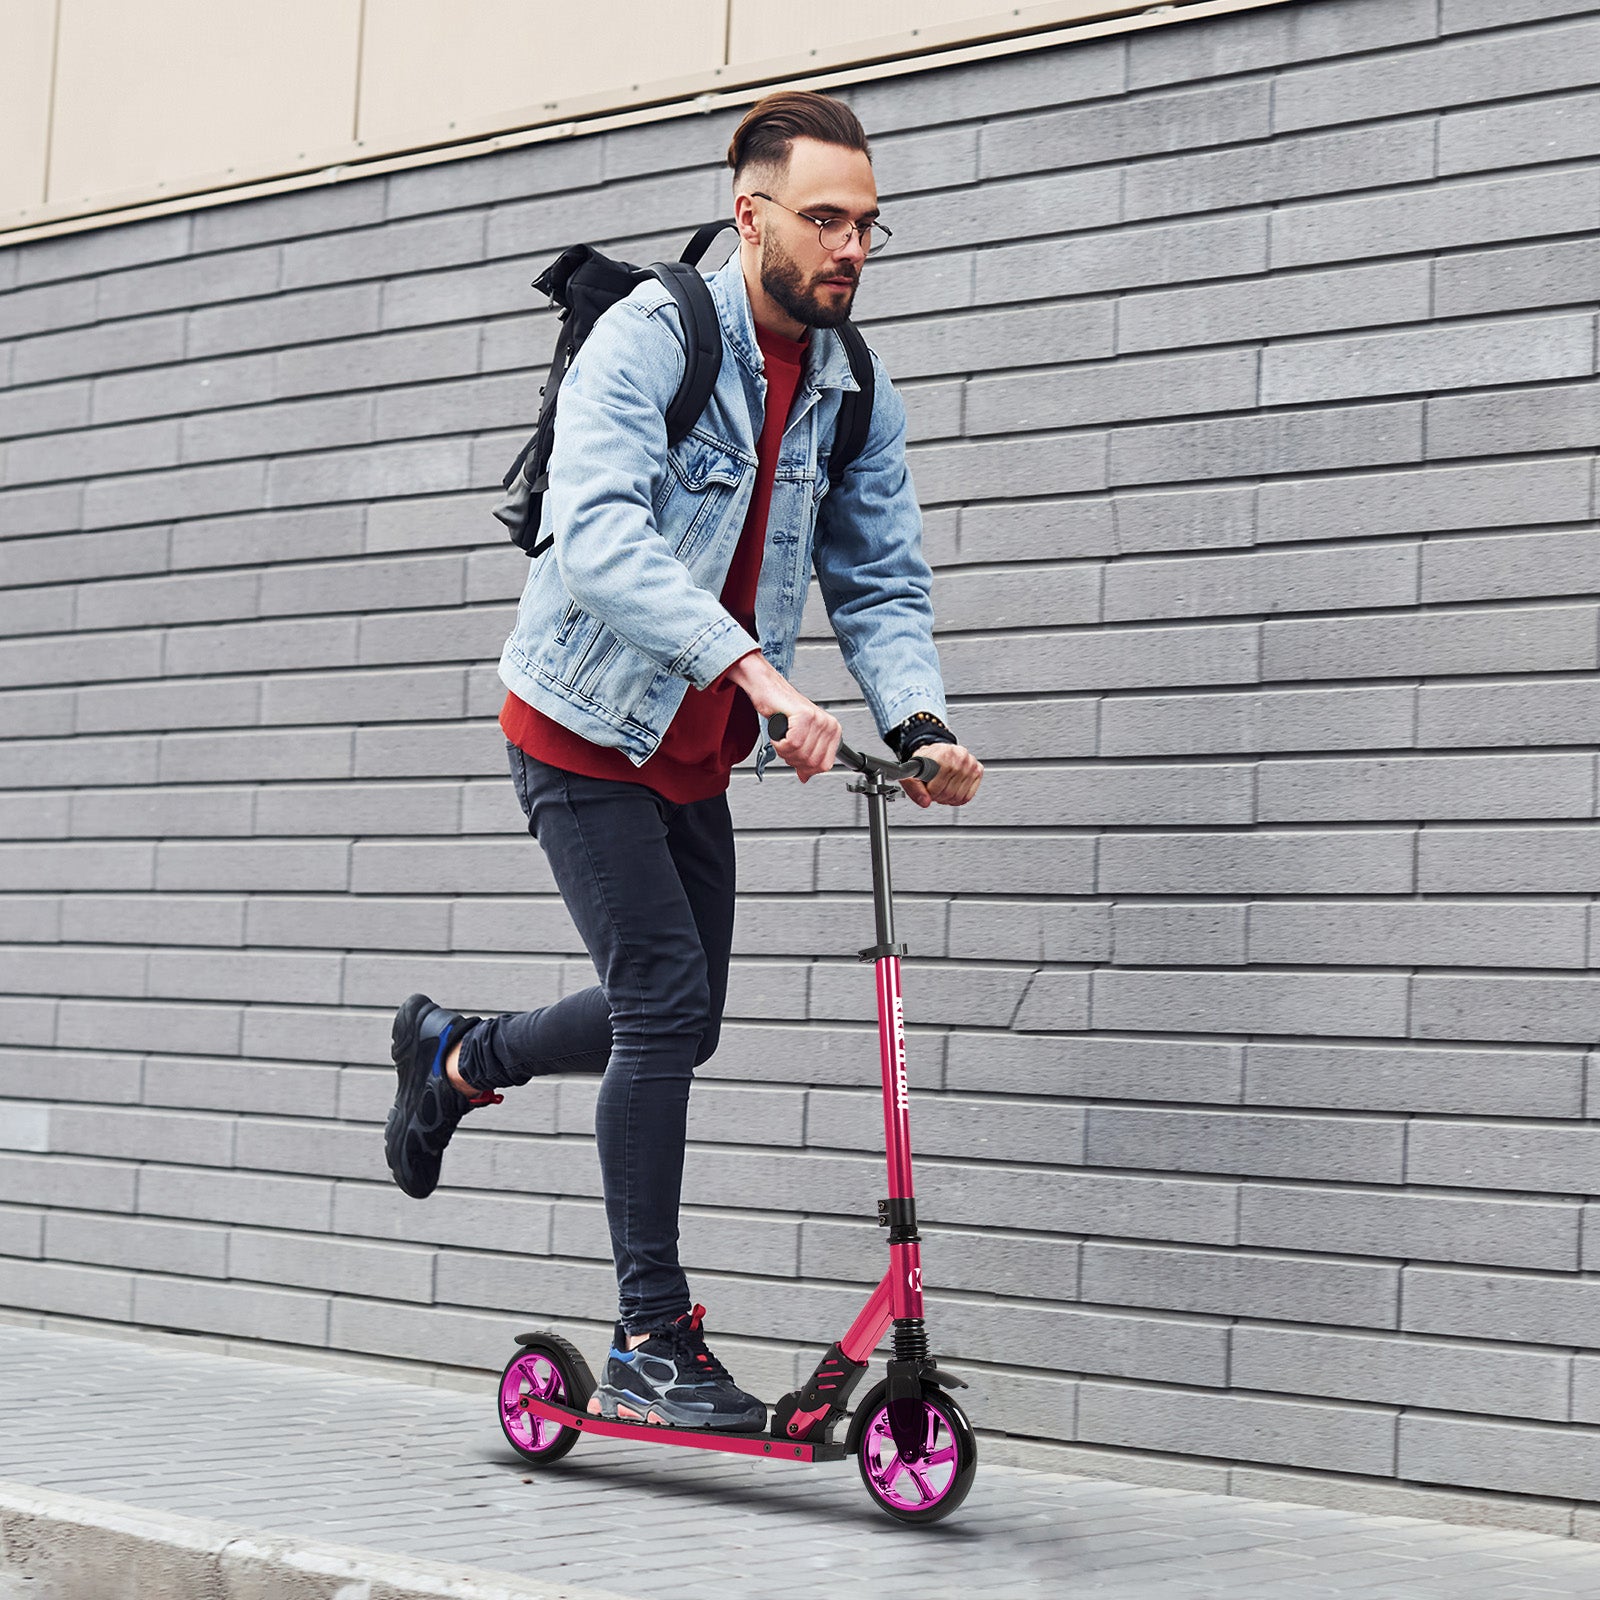 Foldable-Scooter-Adjustable-Handlebar-Height-with-Kickstand-180-mm-Wheels-Stable-Aluminum-Scooter-for-Adults-and-Teenagers-up-to-100-kg-Pink